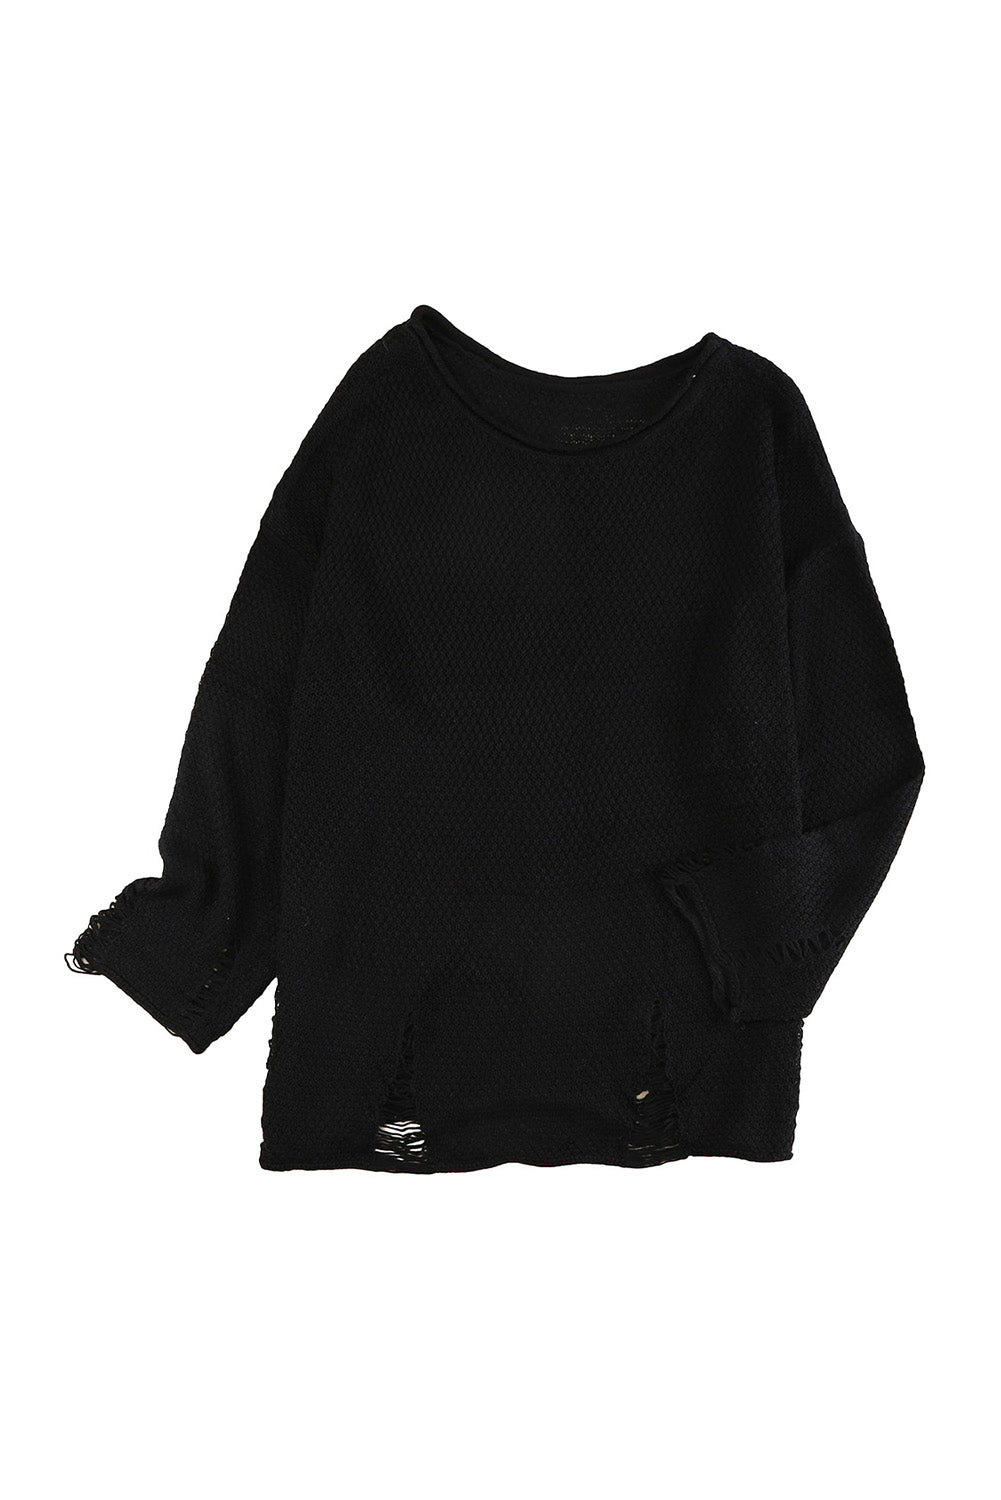 Black Casual Distressed Ripped Crop Knit Sweater